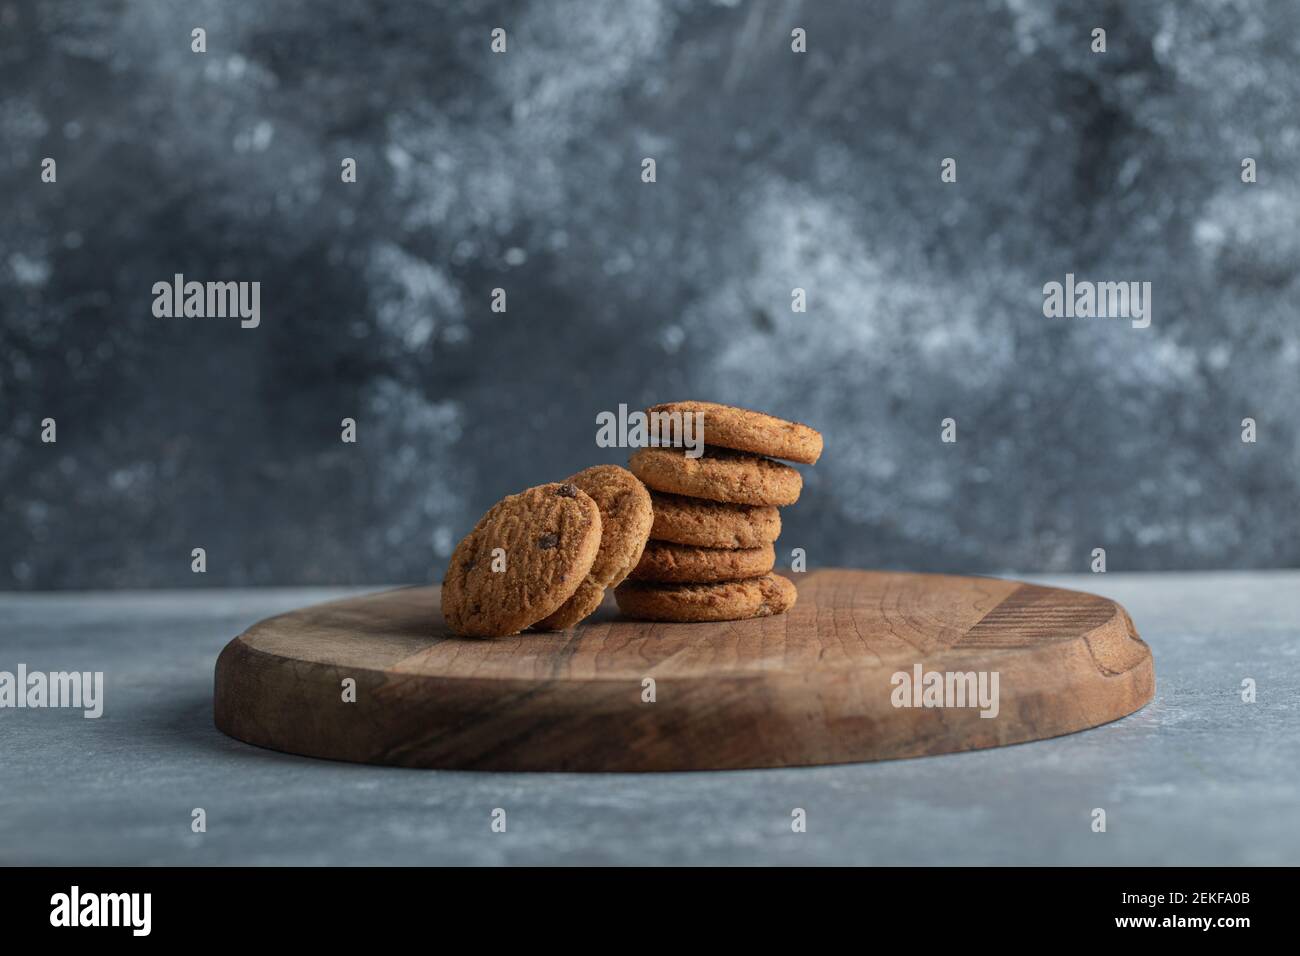 Delicious cookies with chocolate on a gray background Stock Photo